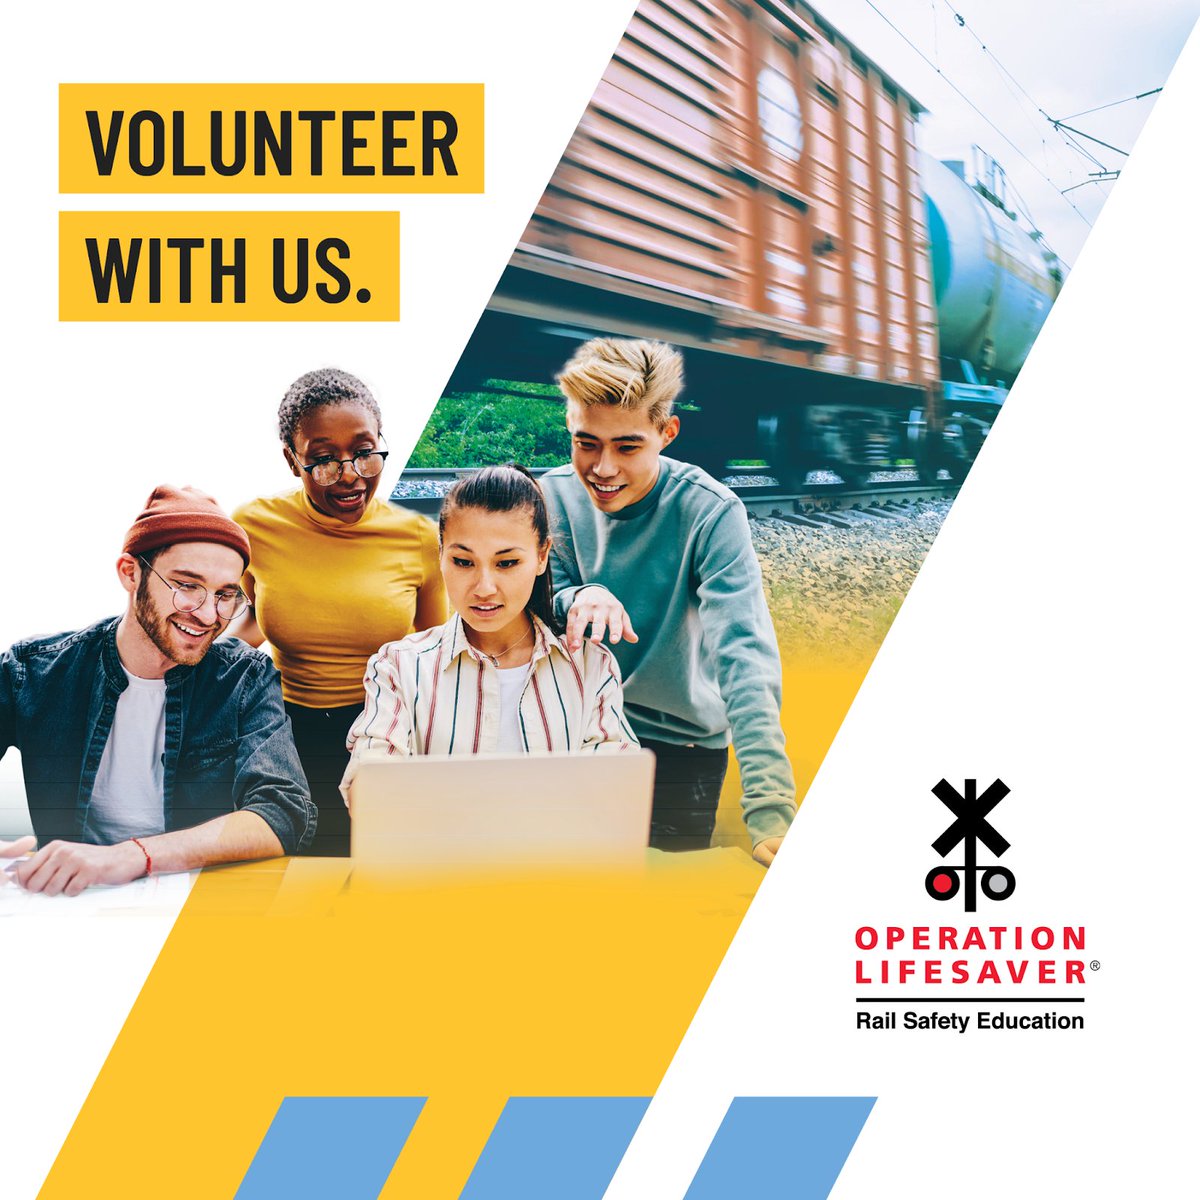 Happy #NationalVolunteerMonth! Volunteer with us and make a difference in your community: bit.ly/3cAb0Oo

#RailSafetyEducation
#STOPTrackTragedies